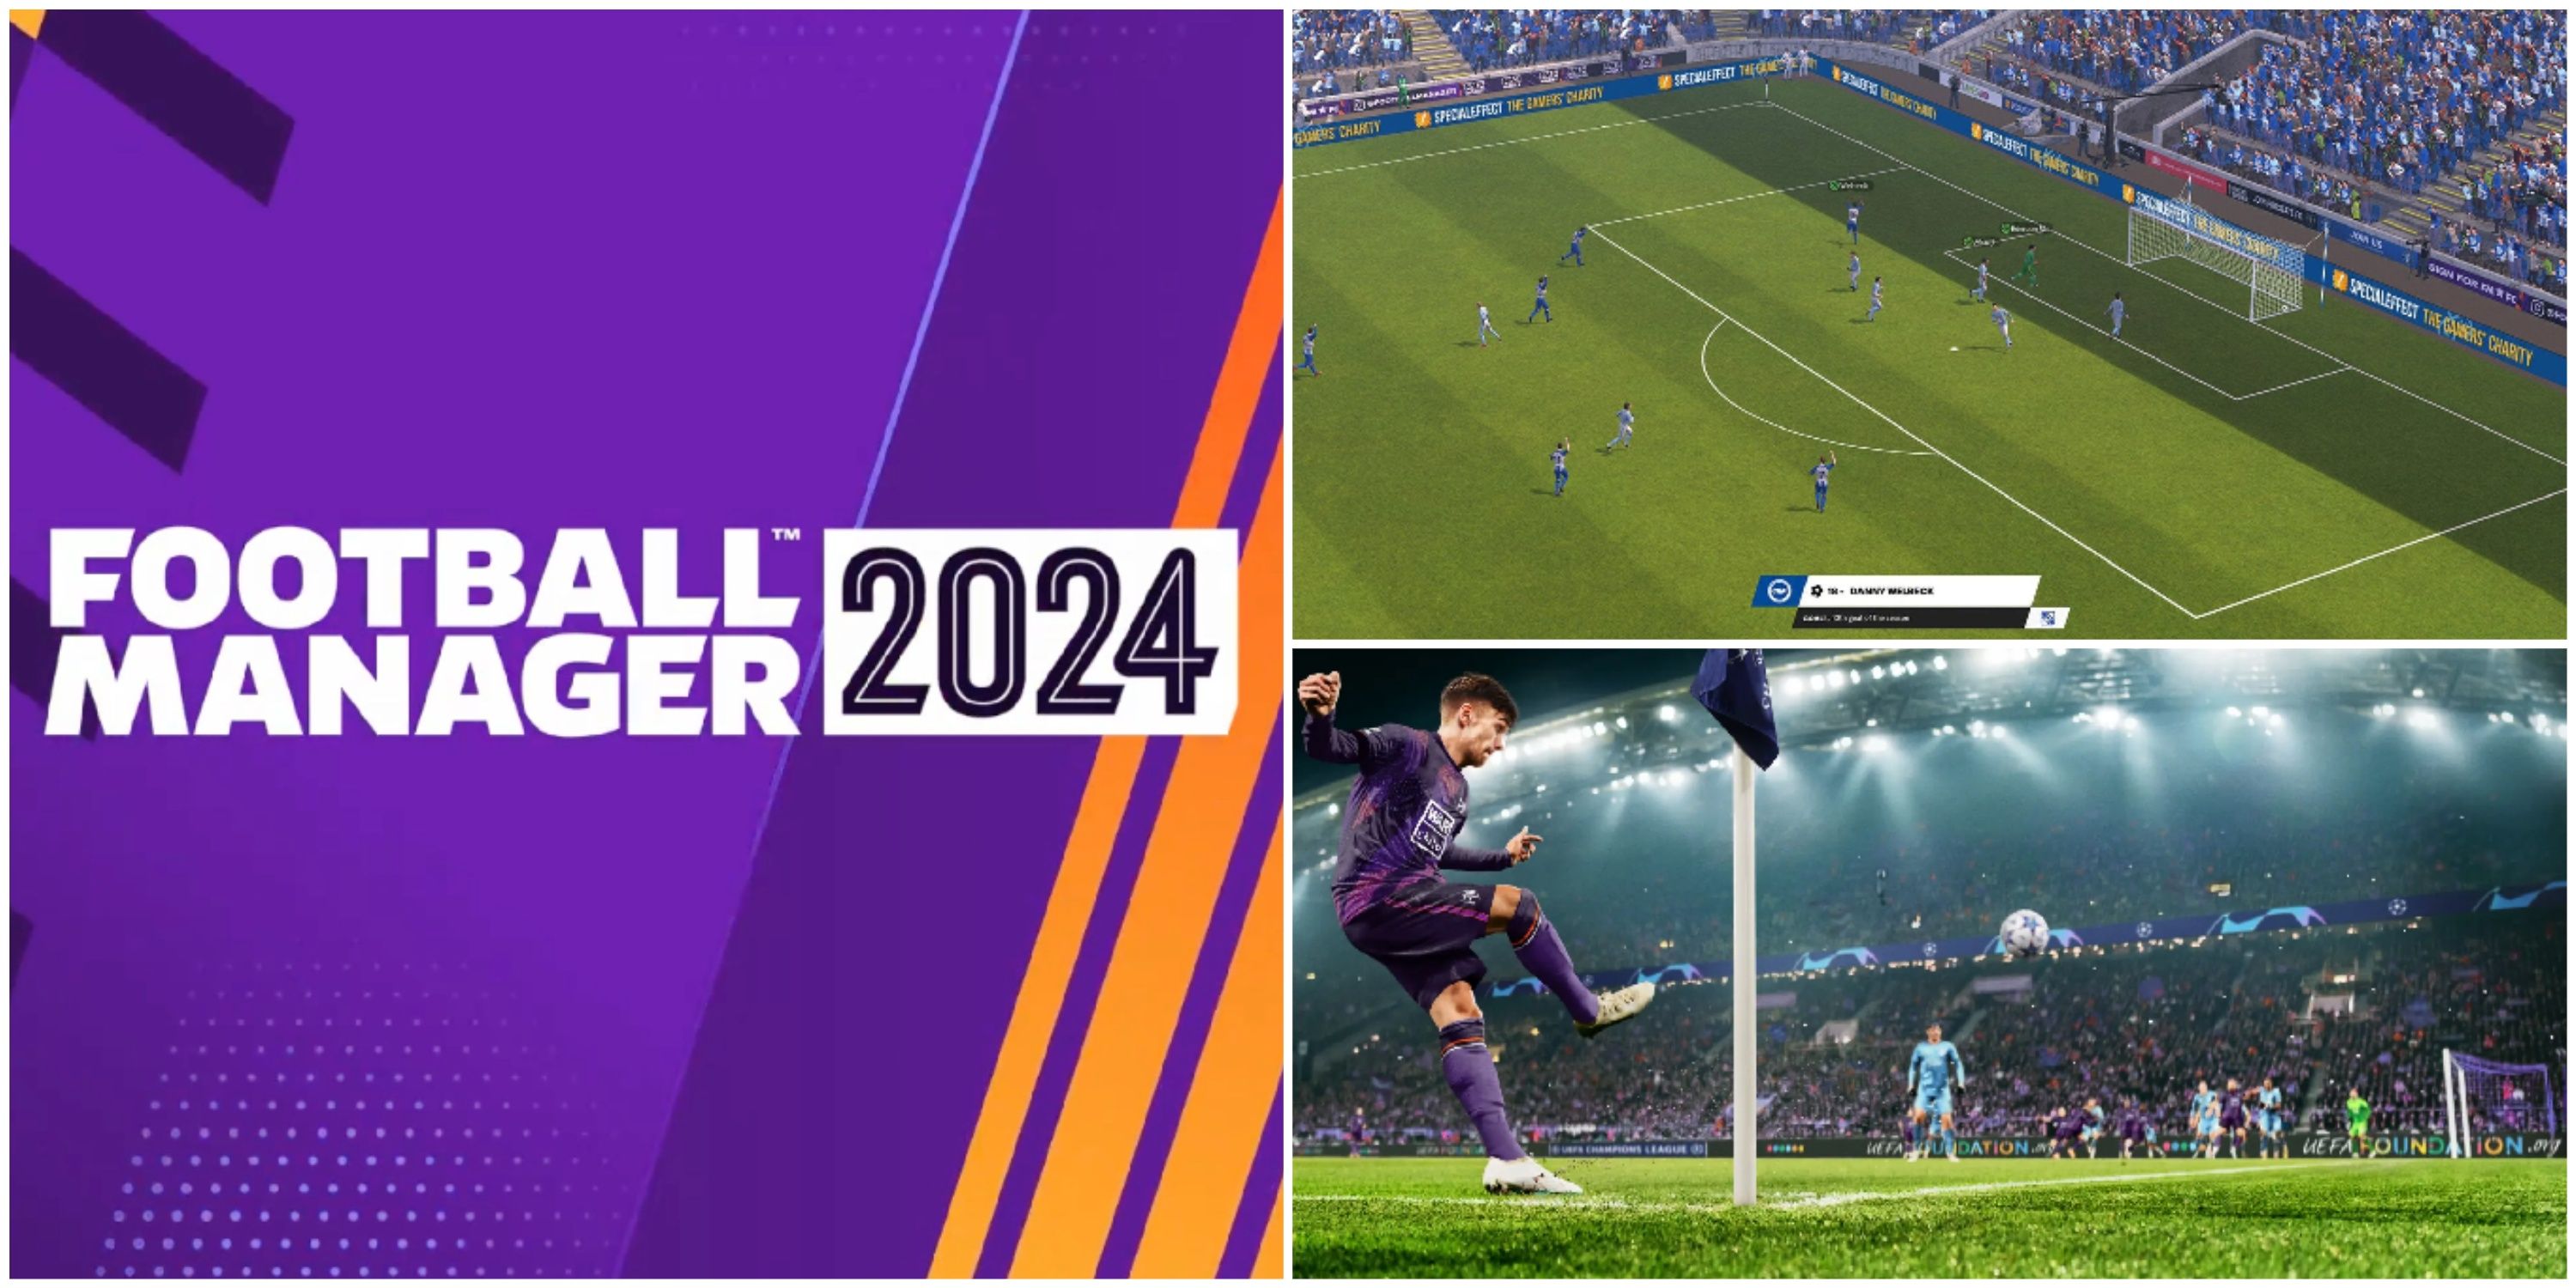 Is Football Manager 2024 available on the Xbox Game Pass?